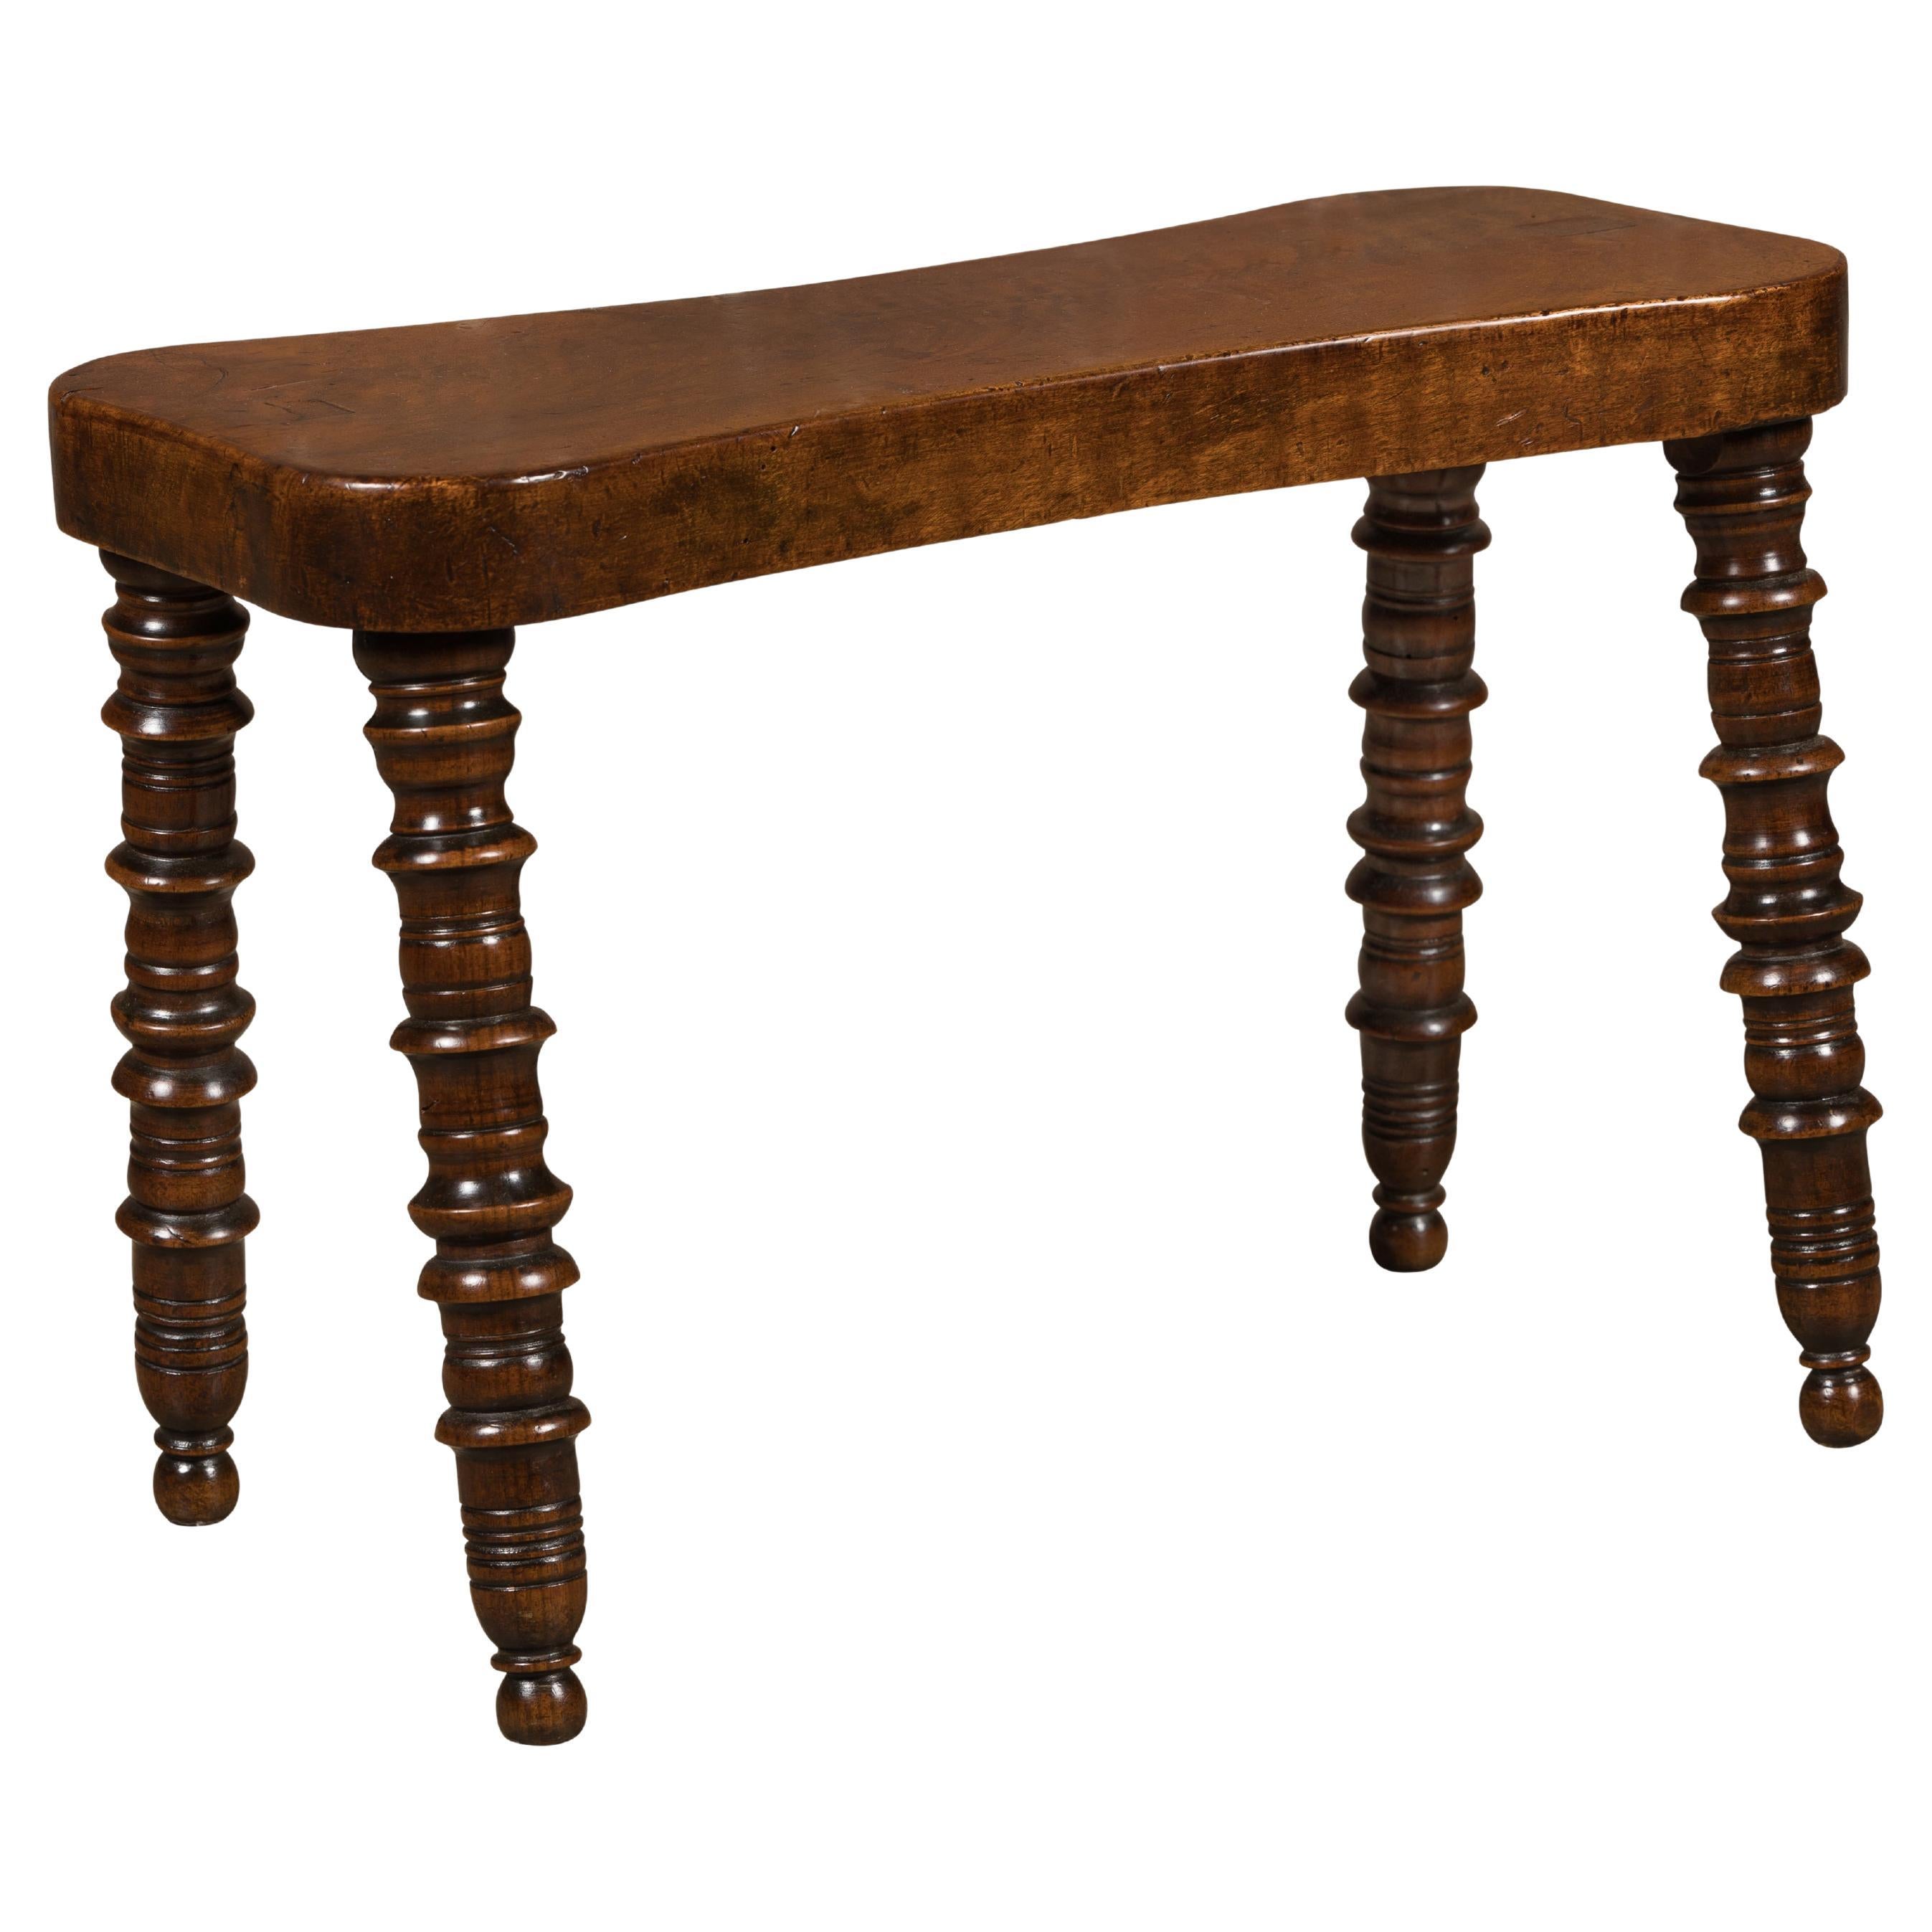 English 19th Century Walnut Stool with Turned Legs and Ball Feet For Sale